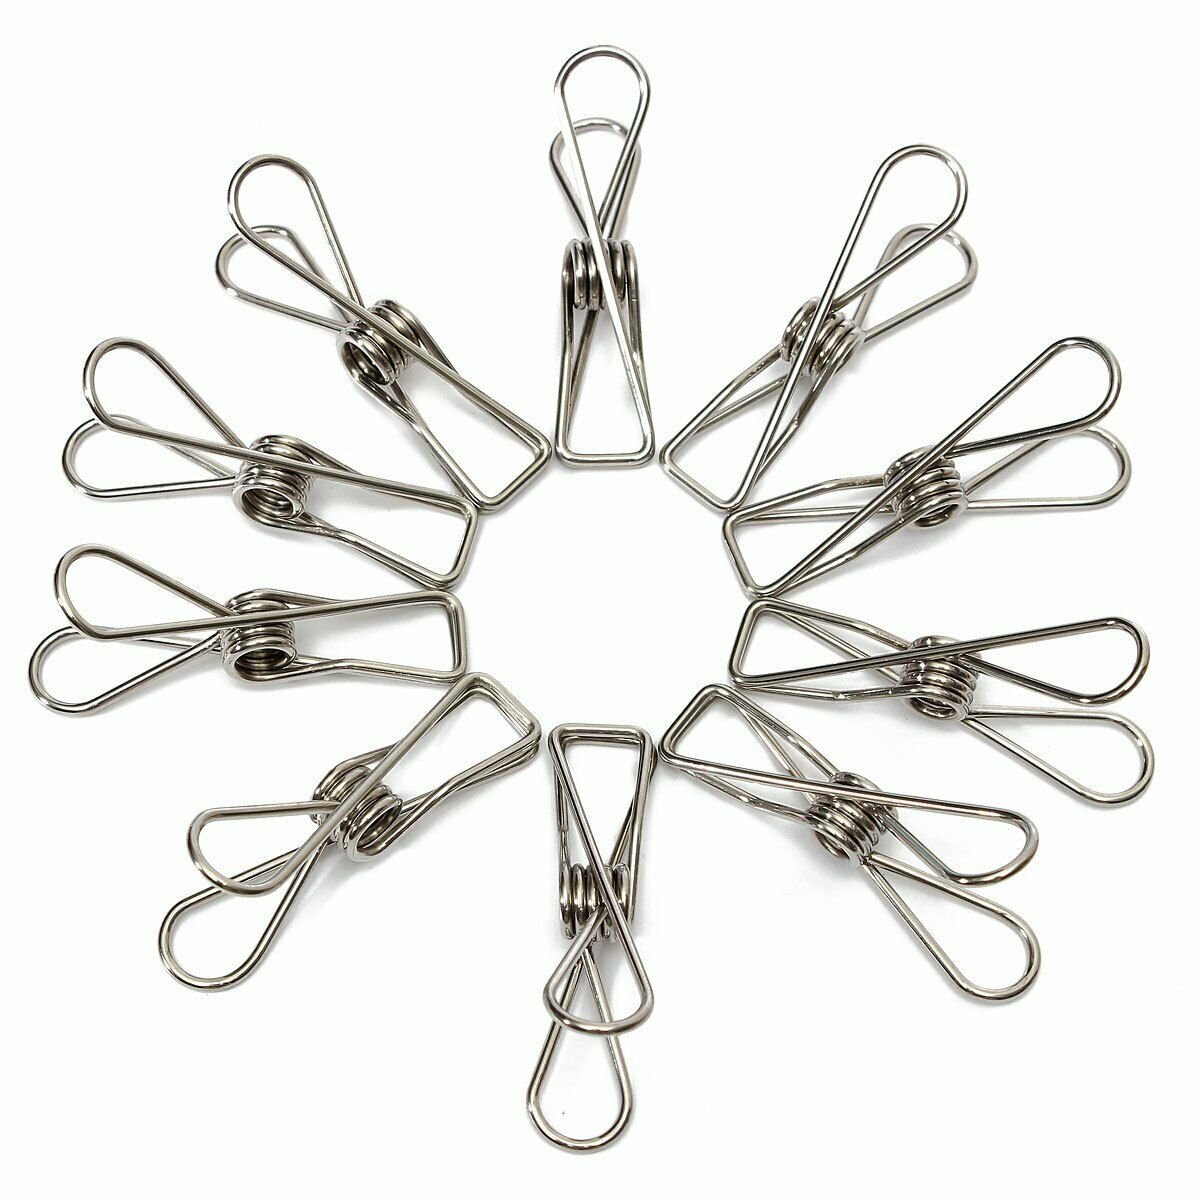 

60Pcs Stainless Steel Clothes Pegs Hanging Clips Pins Laundry Windproof Clamp Household Clothespin